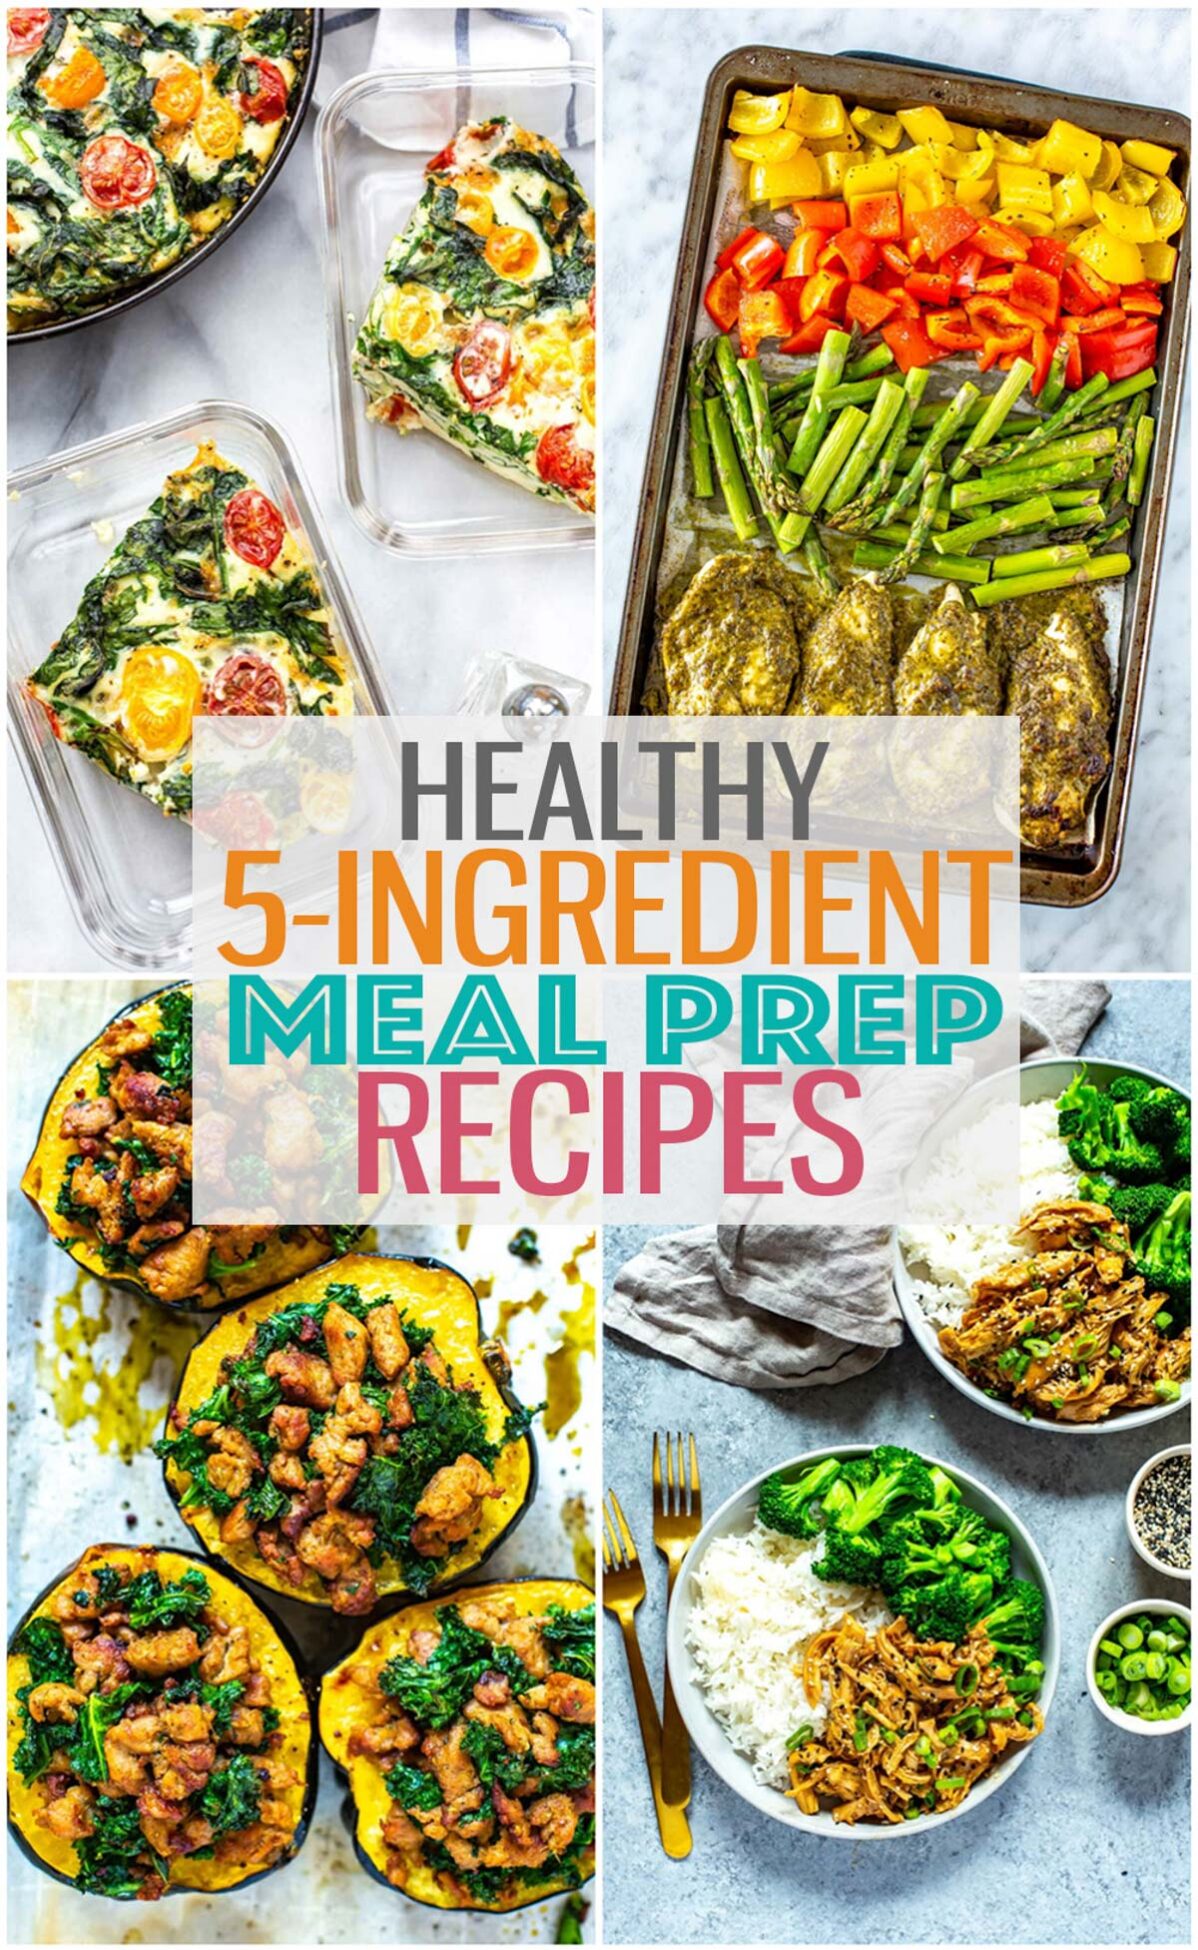 A collage featuring egg white frittata, pesto chicken, stuffed squash and teriyaki chicken with the text "Healthy 5-Ingredient Meal Prep Recipes" layered over top.